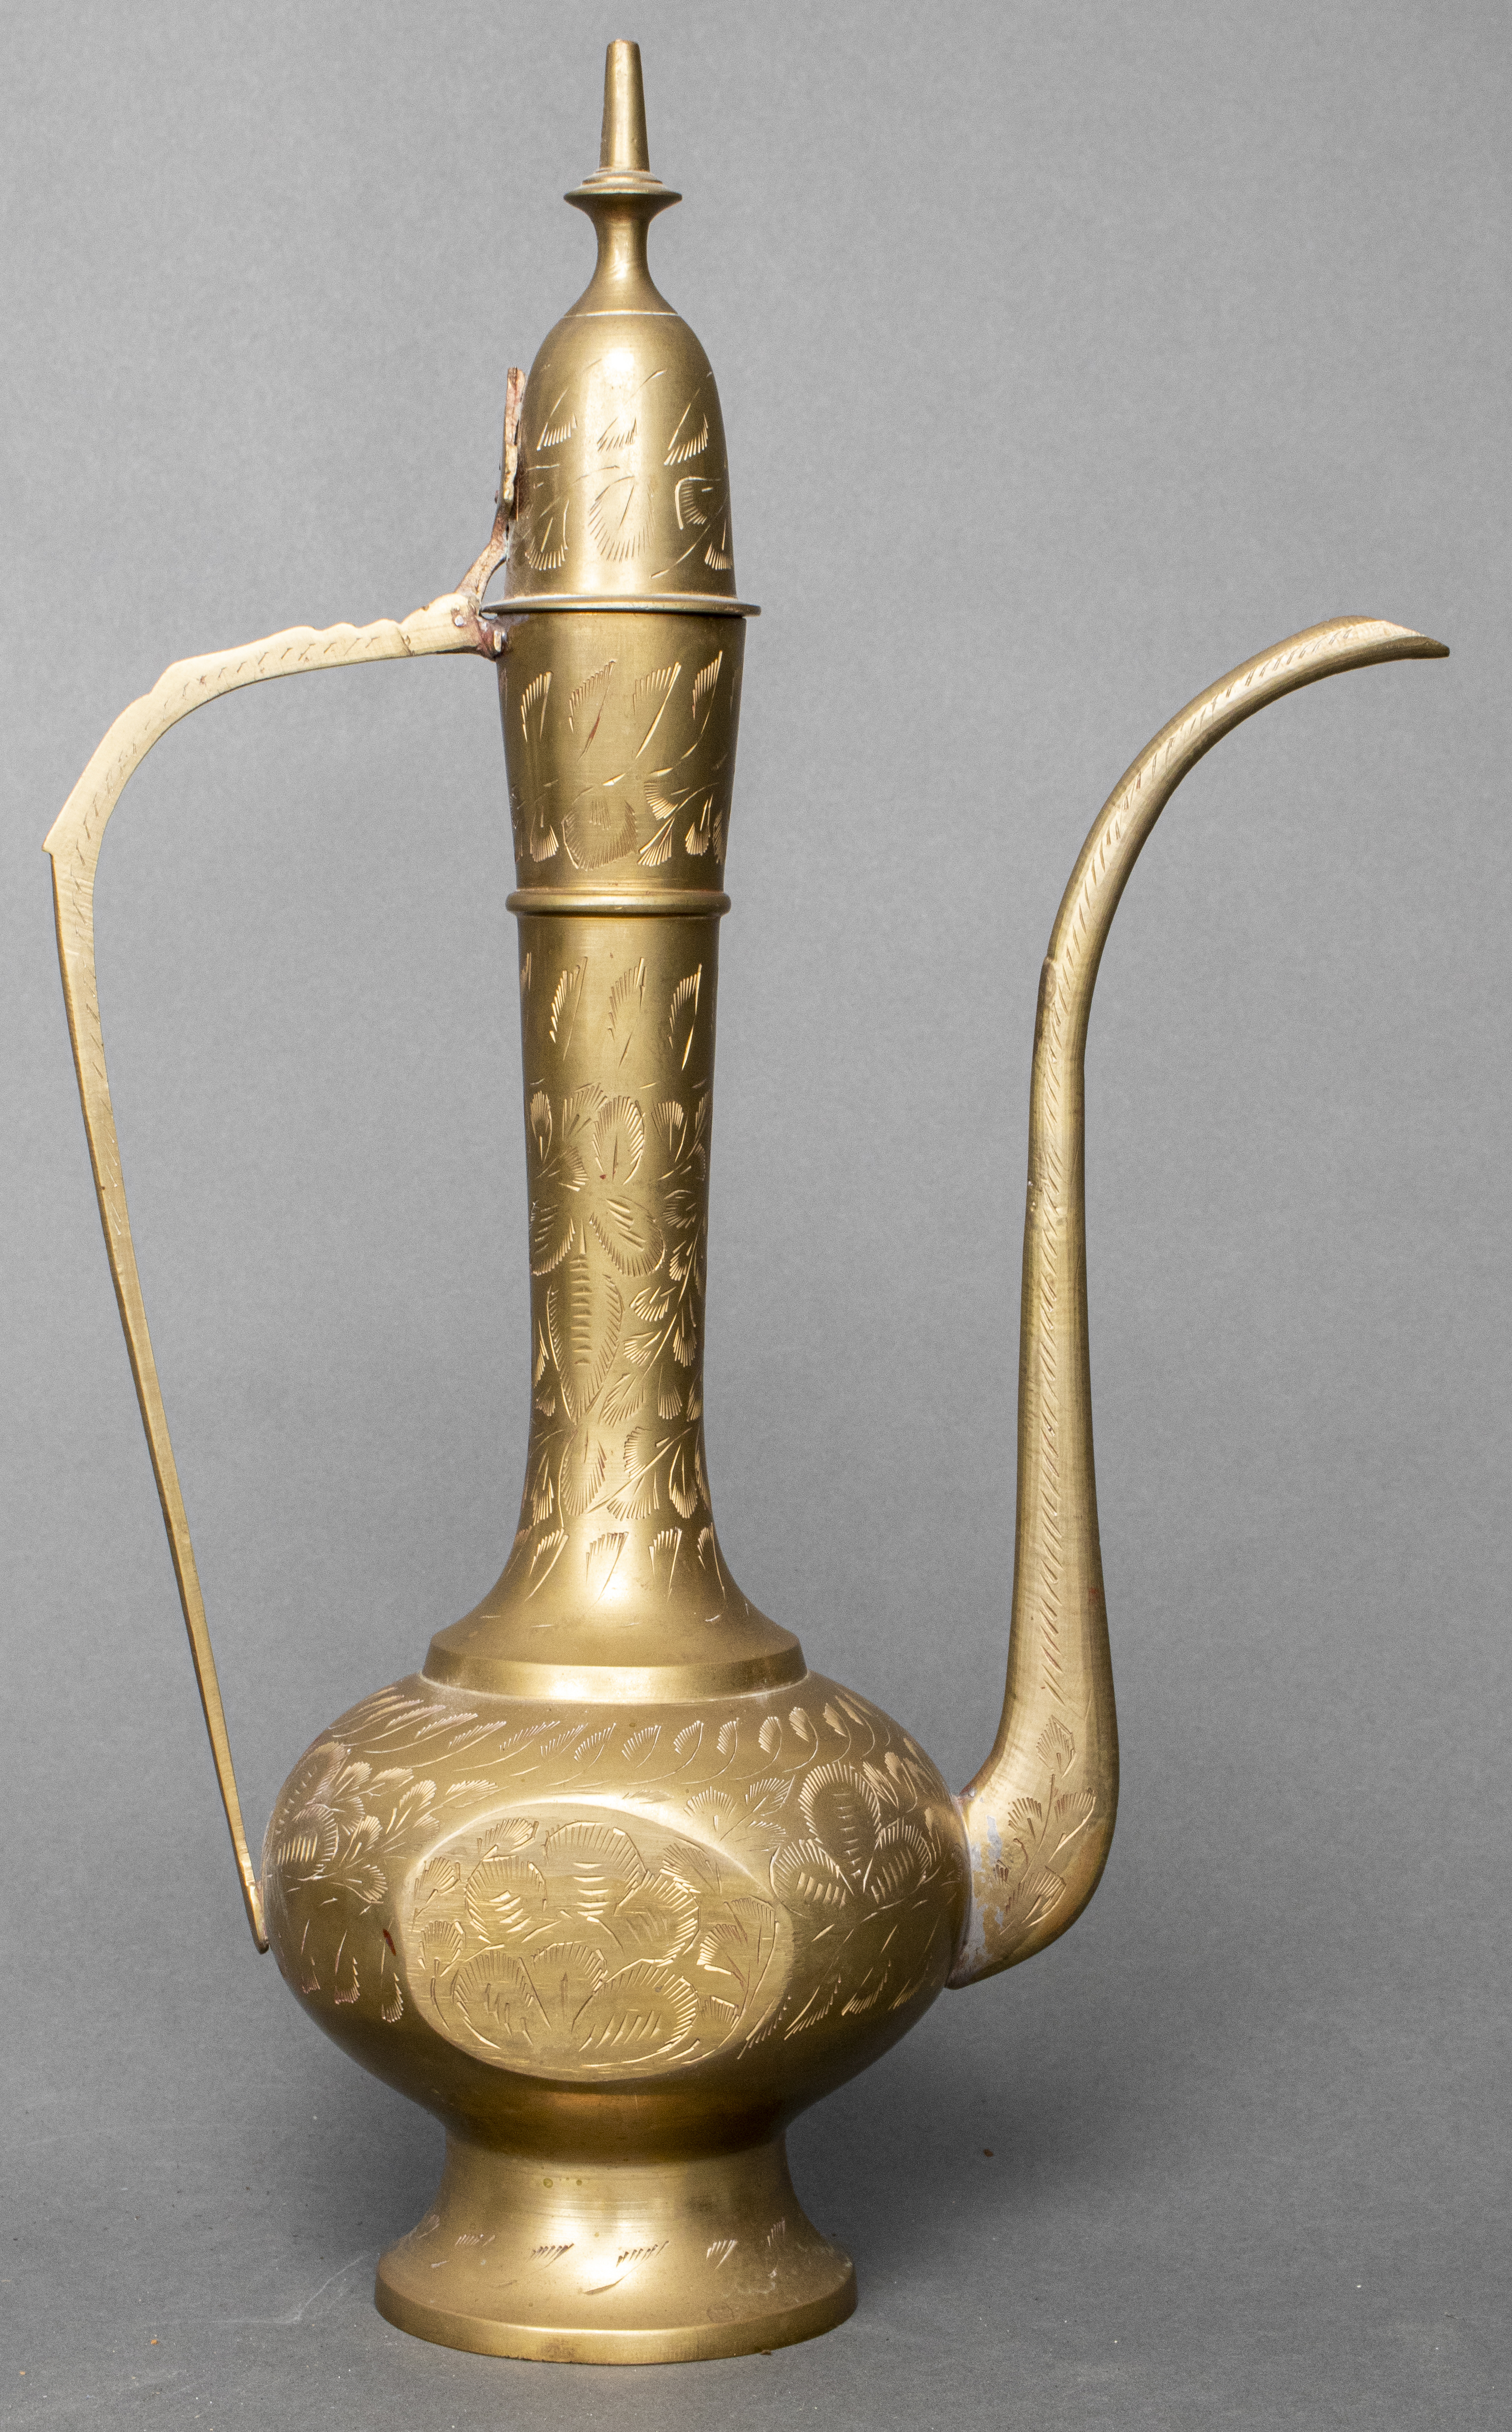 PERSIAN BRASS AFTABA WATER PITCHER 3c4fee